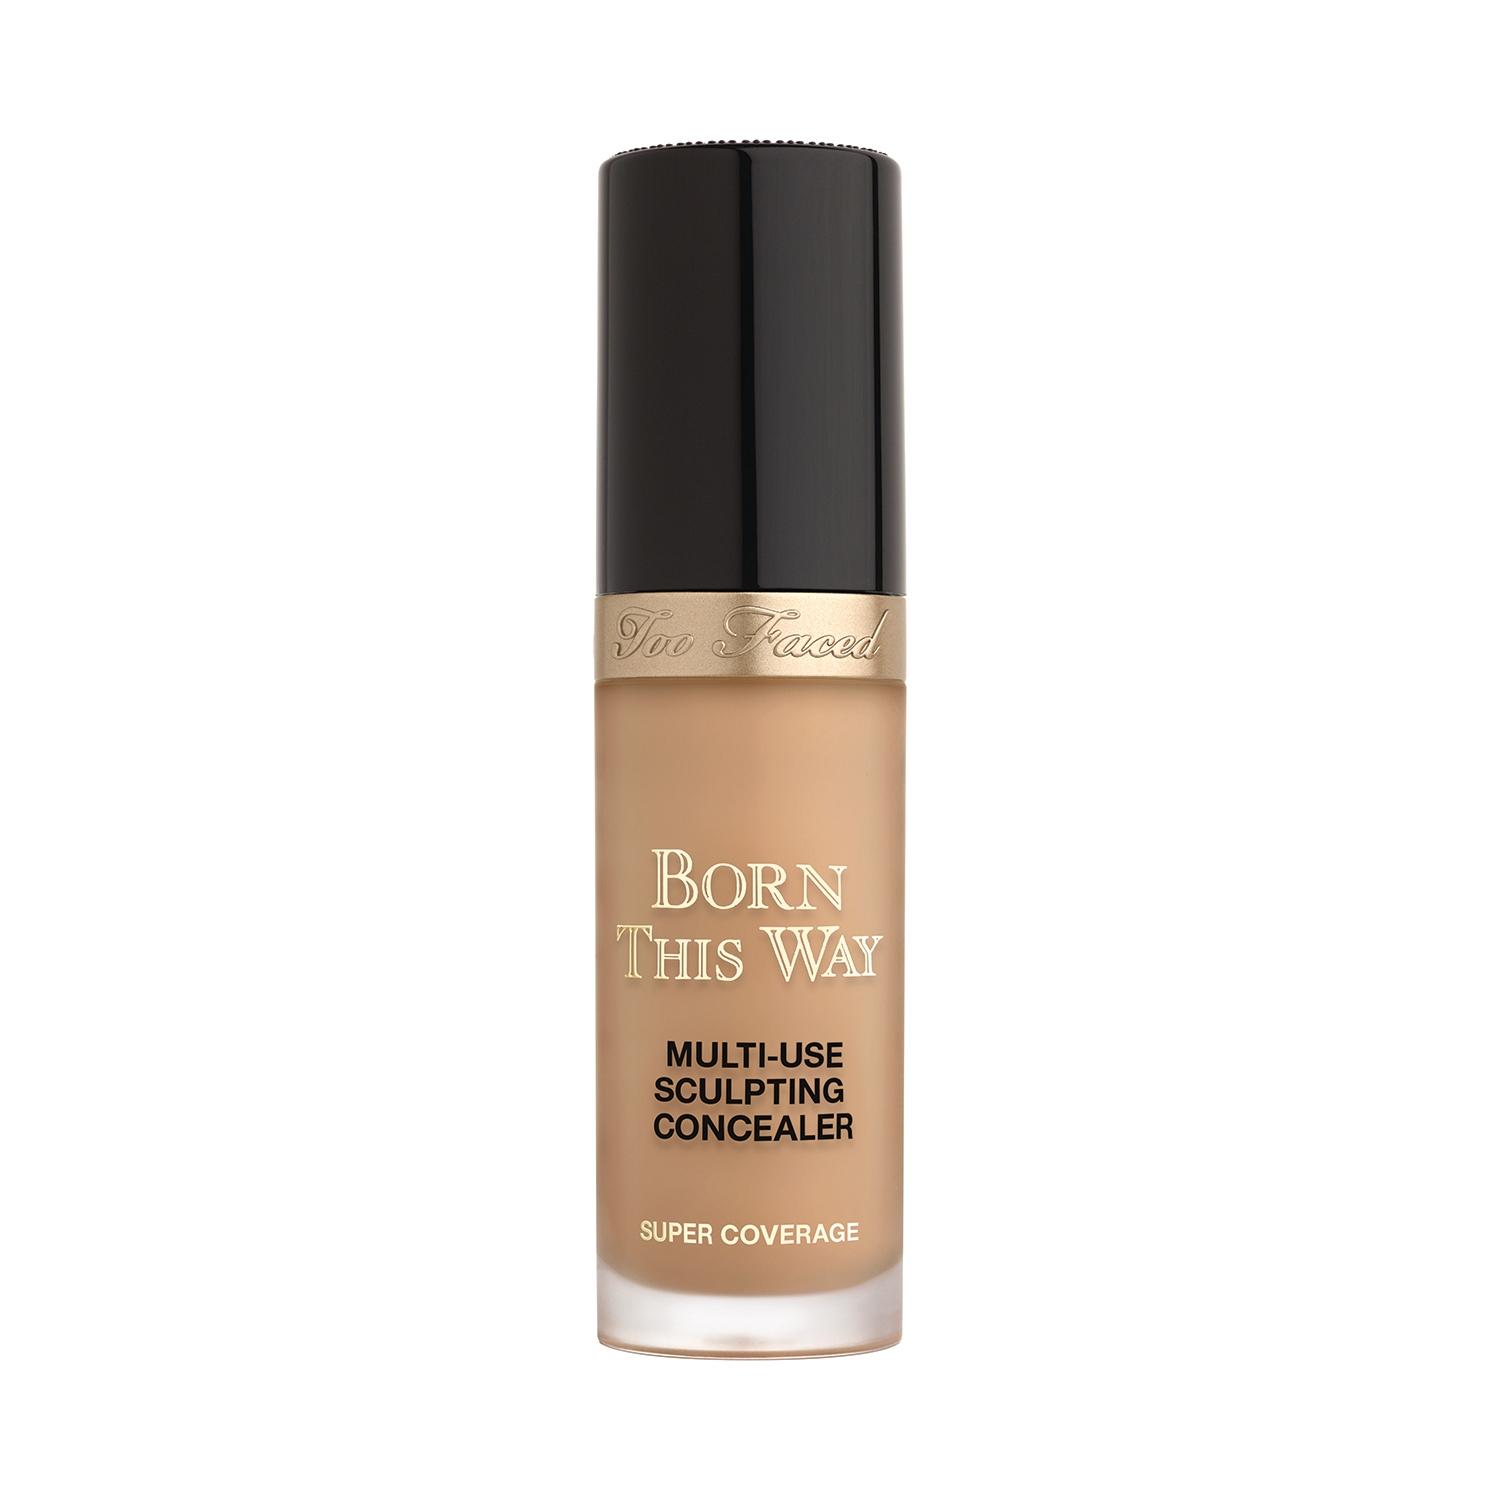 too faced born this way super coverage multi use sculpting concealer - honey (13.5ml)